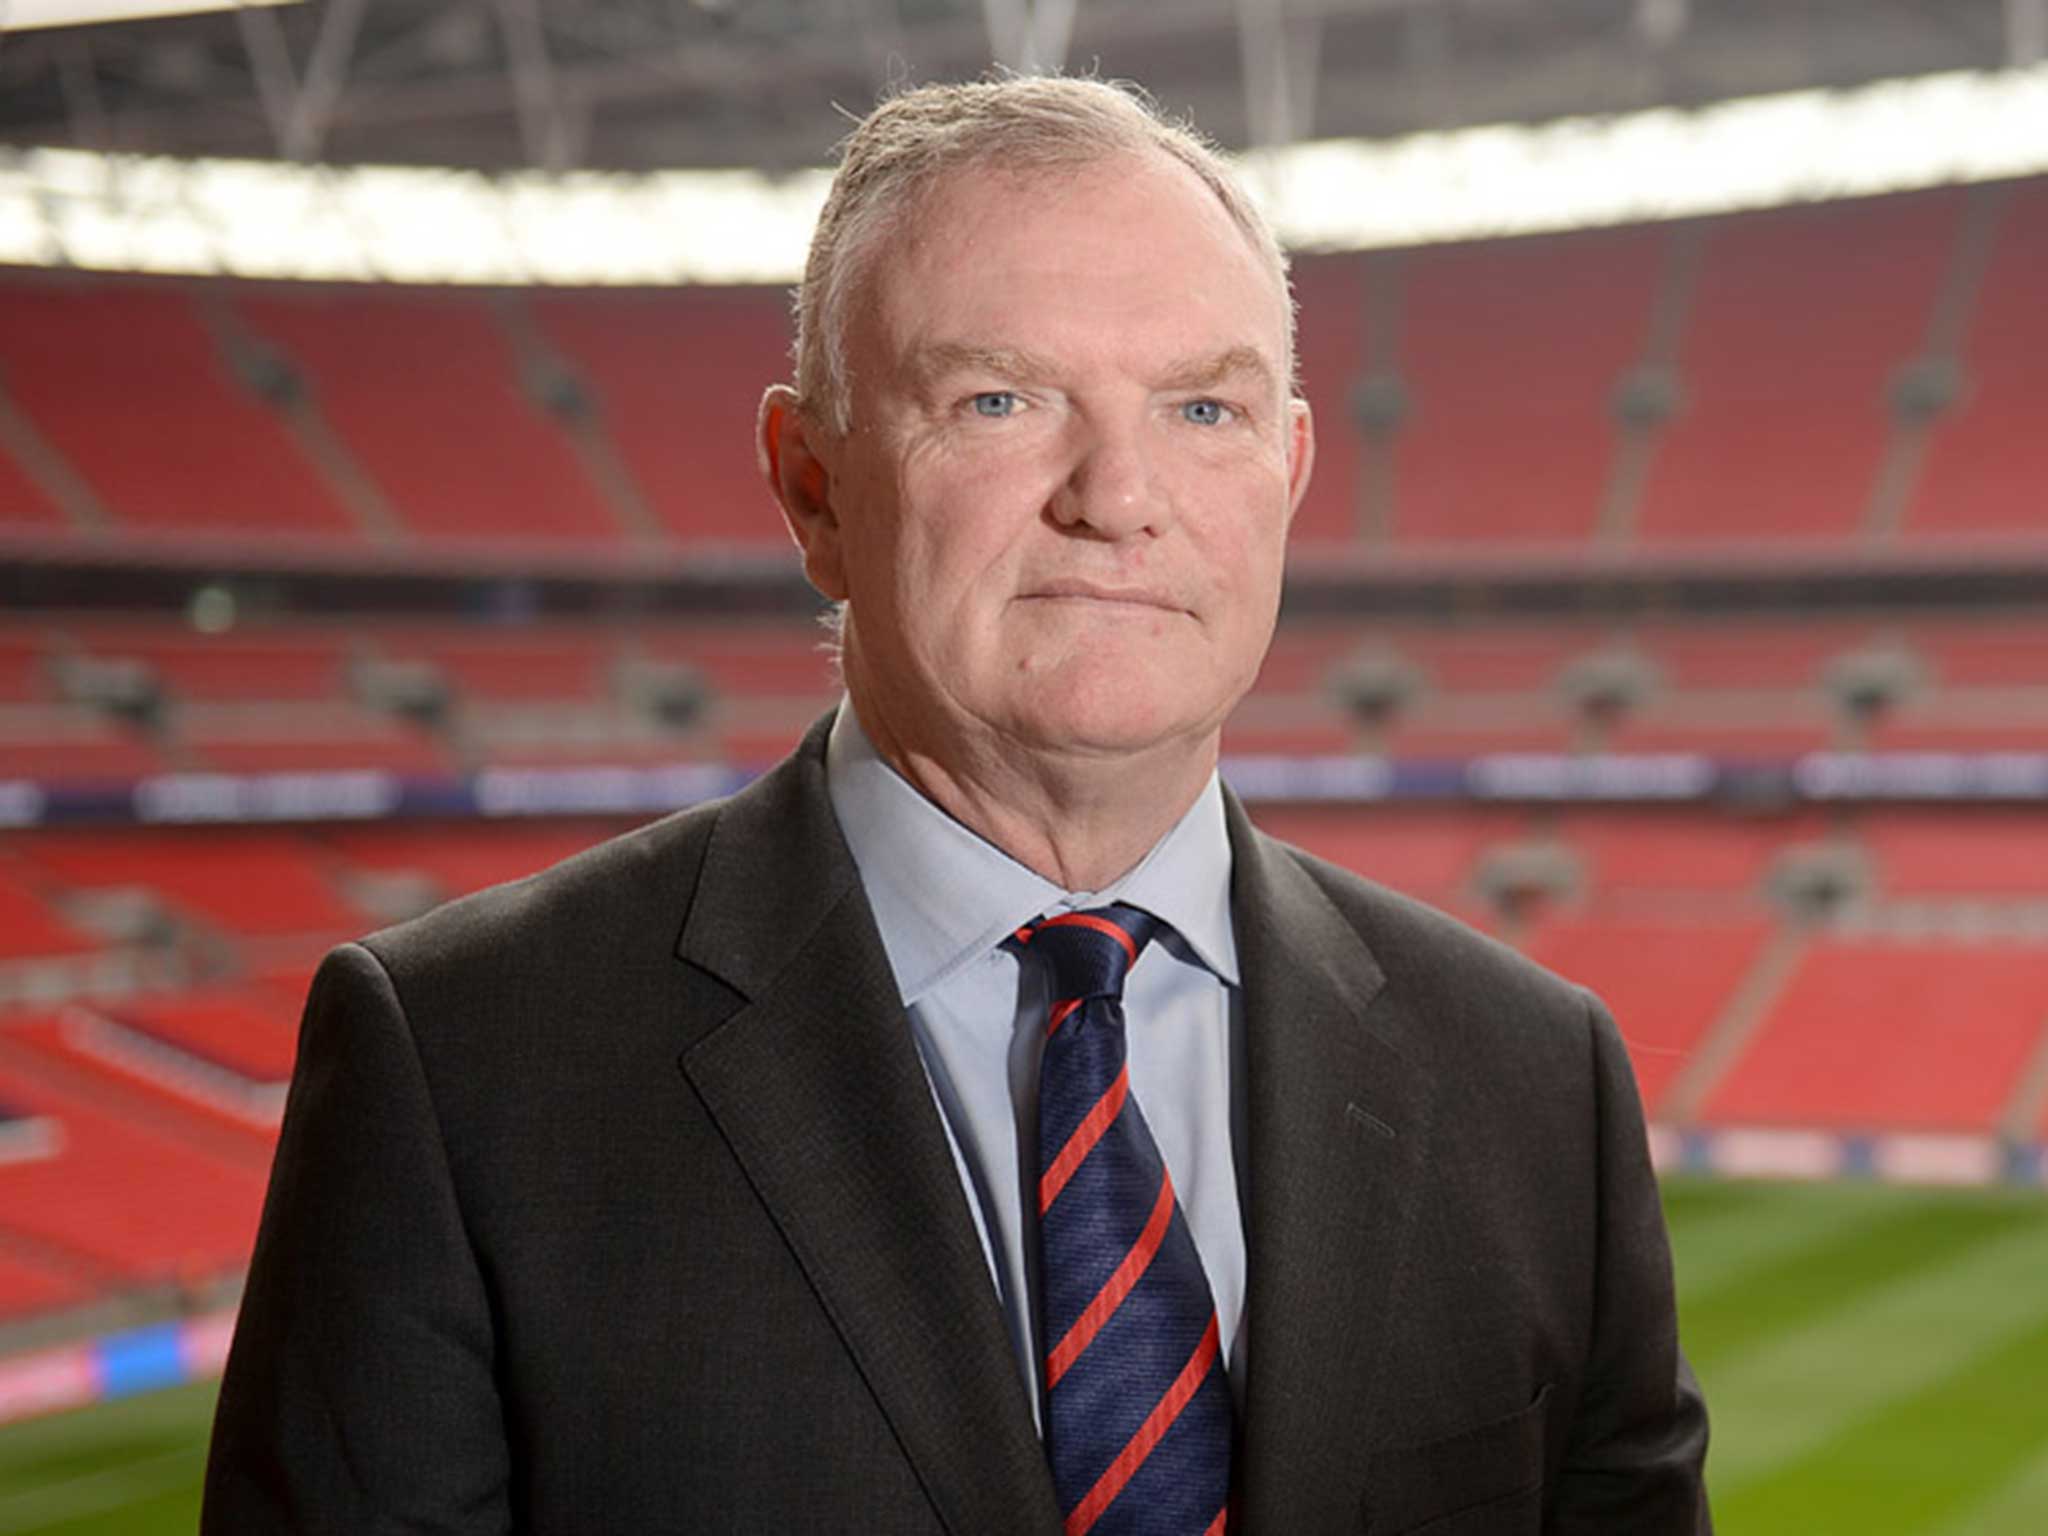 New FA chairman Greg Clarke took up his role in August, and was not involved in the Allardyce appointment